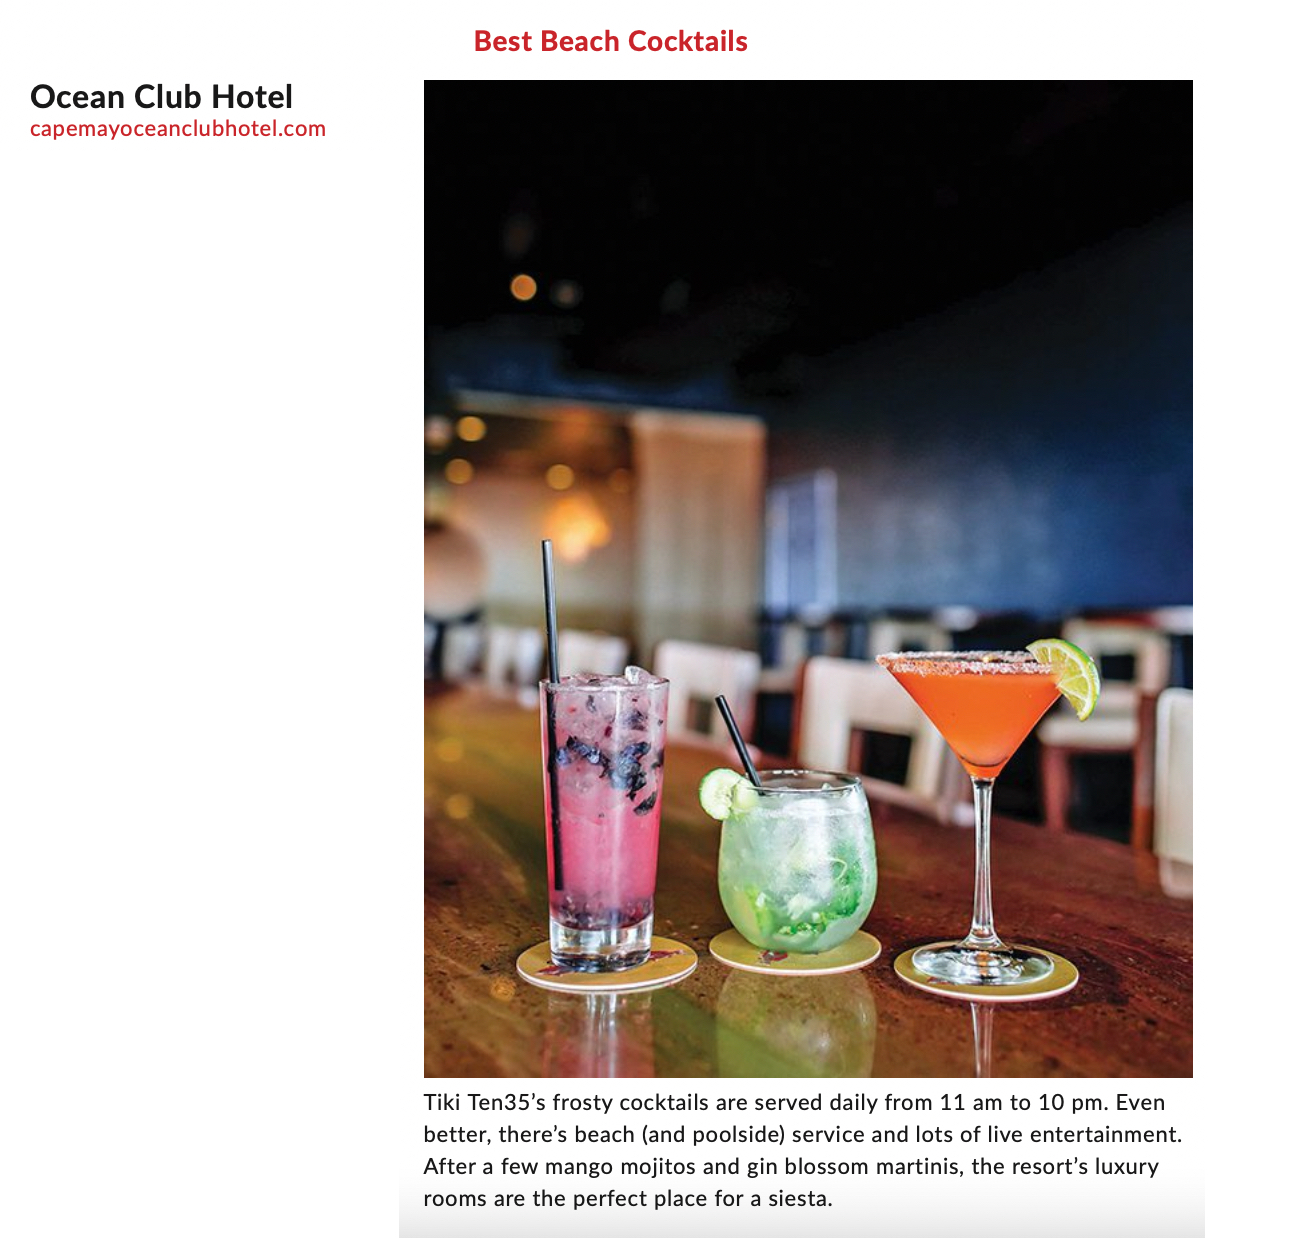 Ocean Club Hotel is named Best of the Shore 2022 for the Best Beach Cocktails category by SJ Magazine.